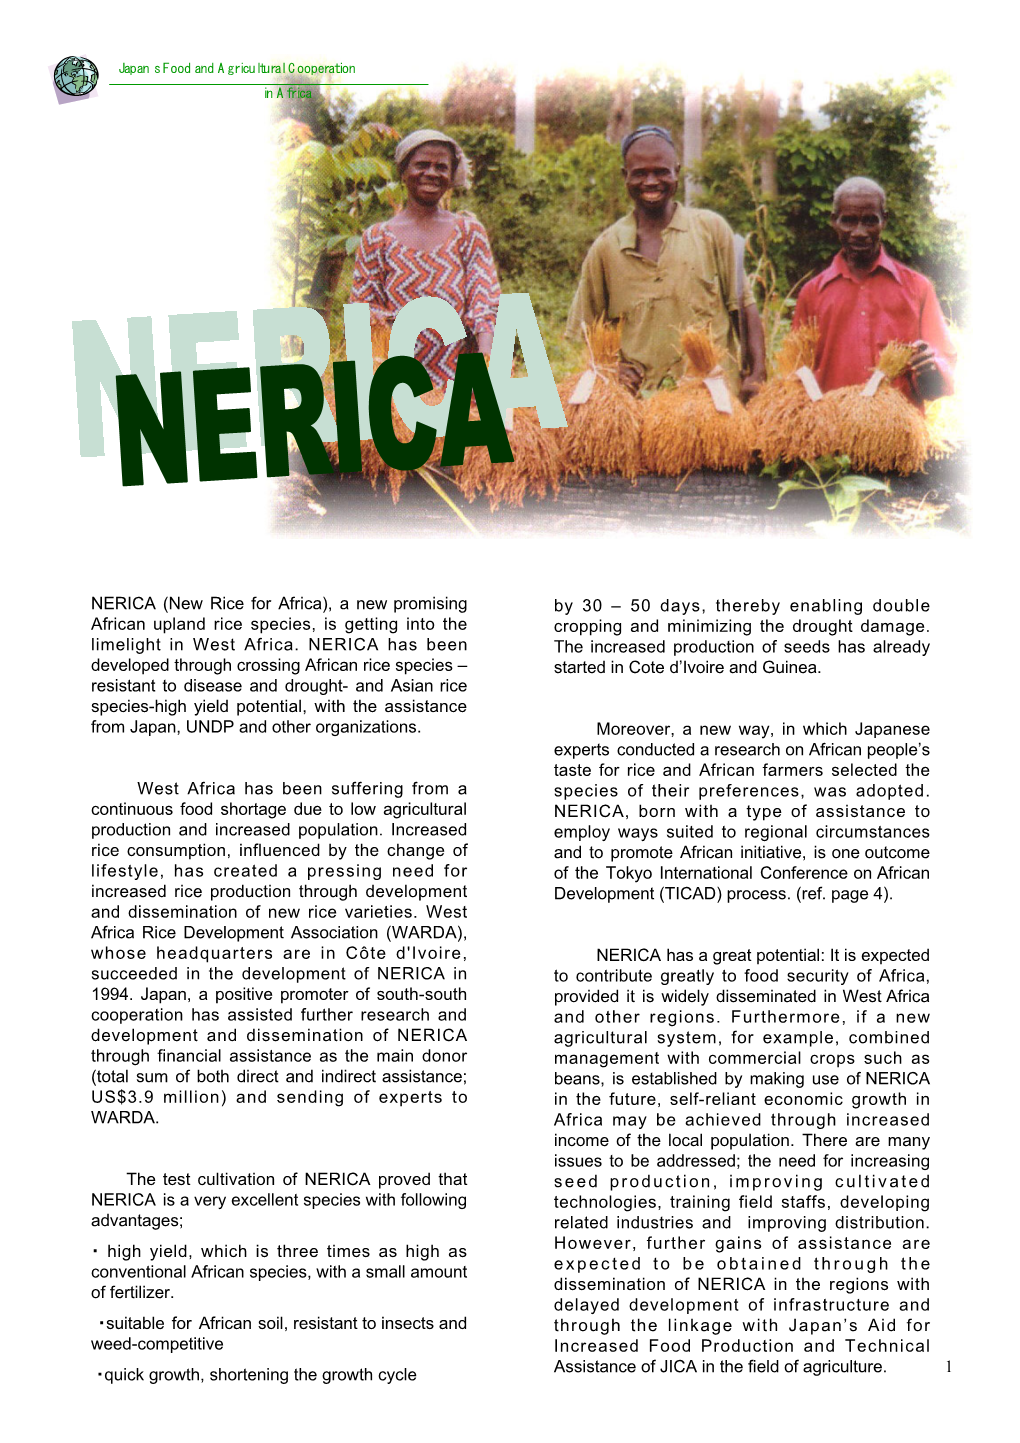 NERICA (New Rice for Africa), a New Promising African Upland Rice